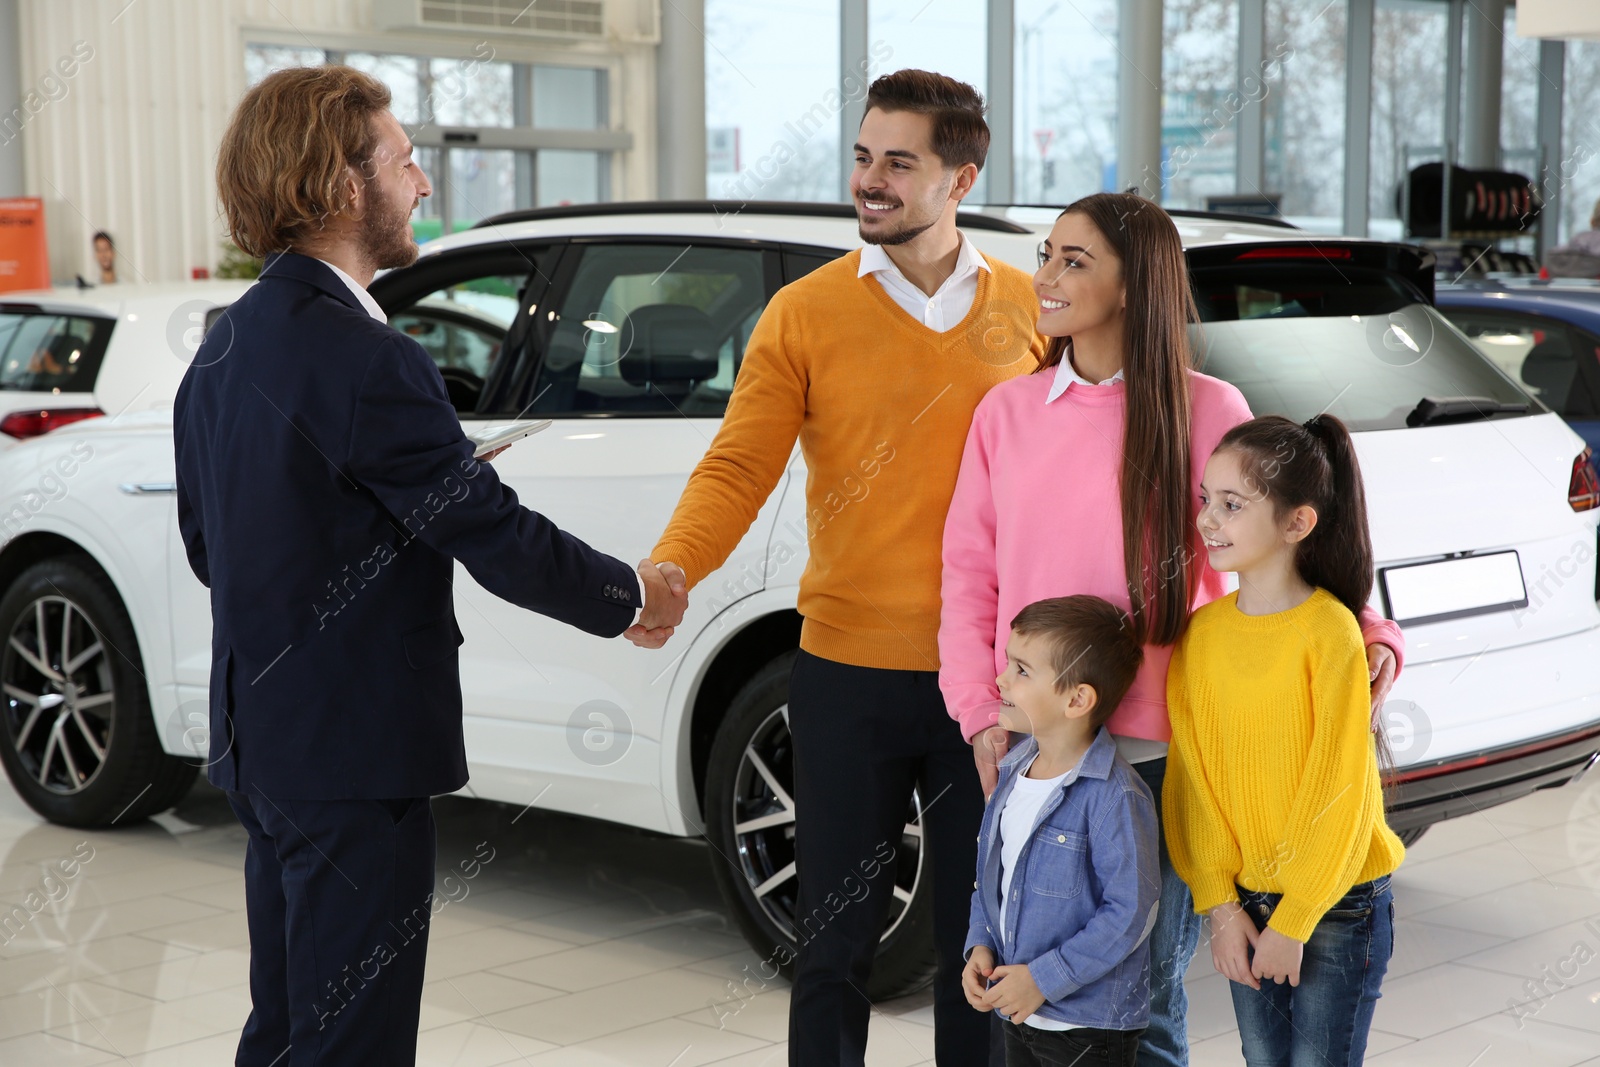 Photo of Car salesman working with family in dealership